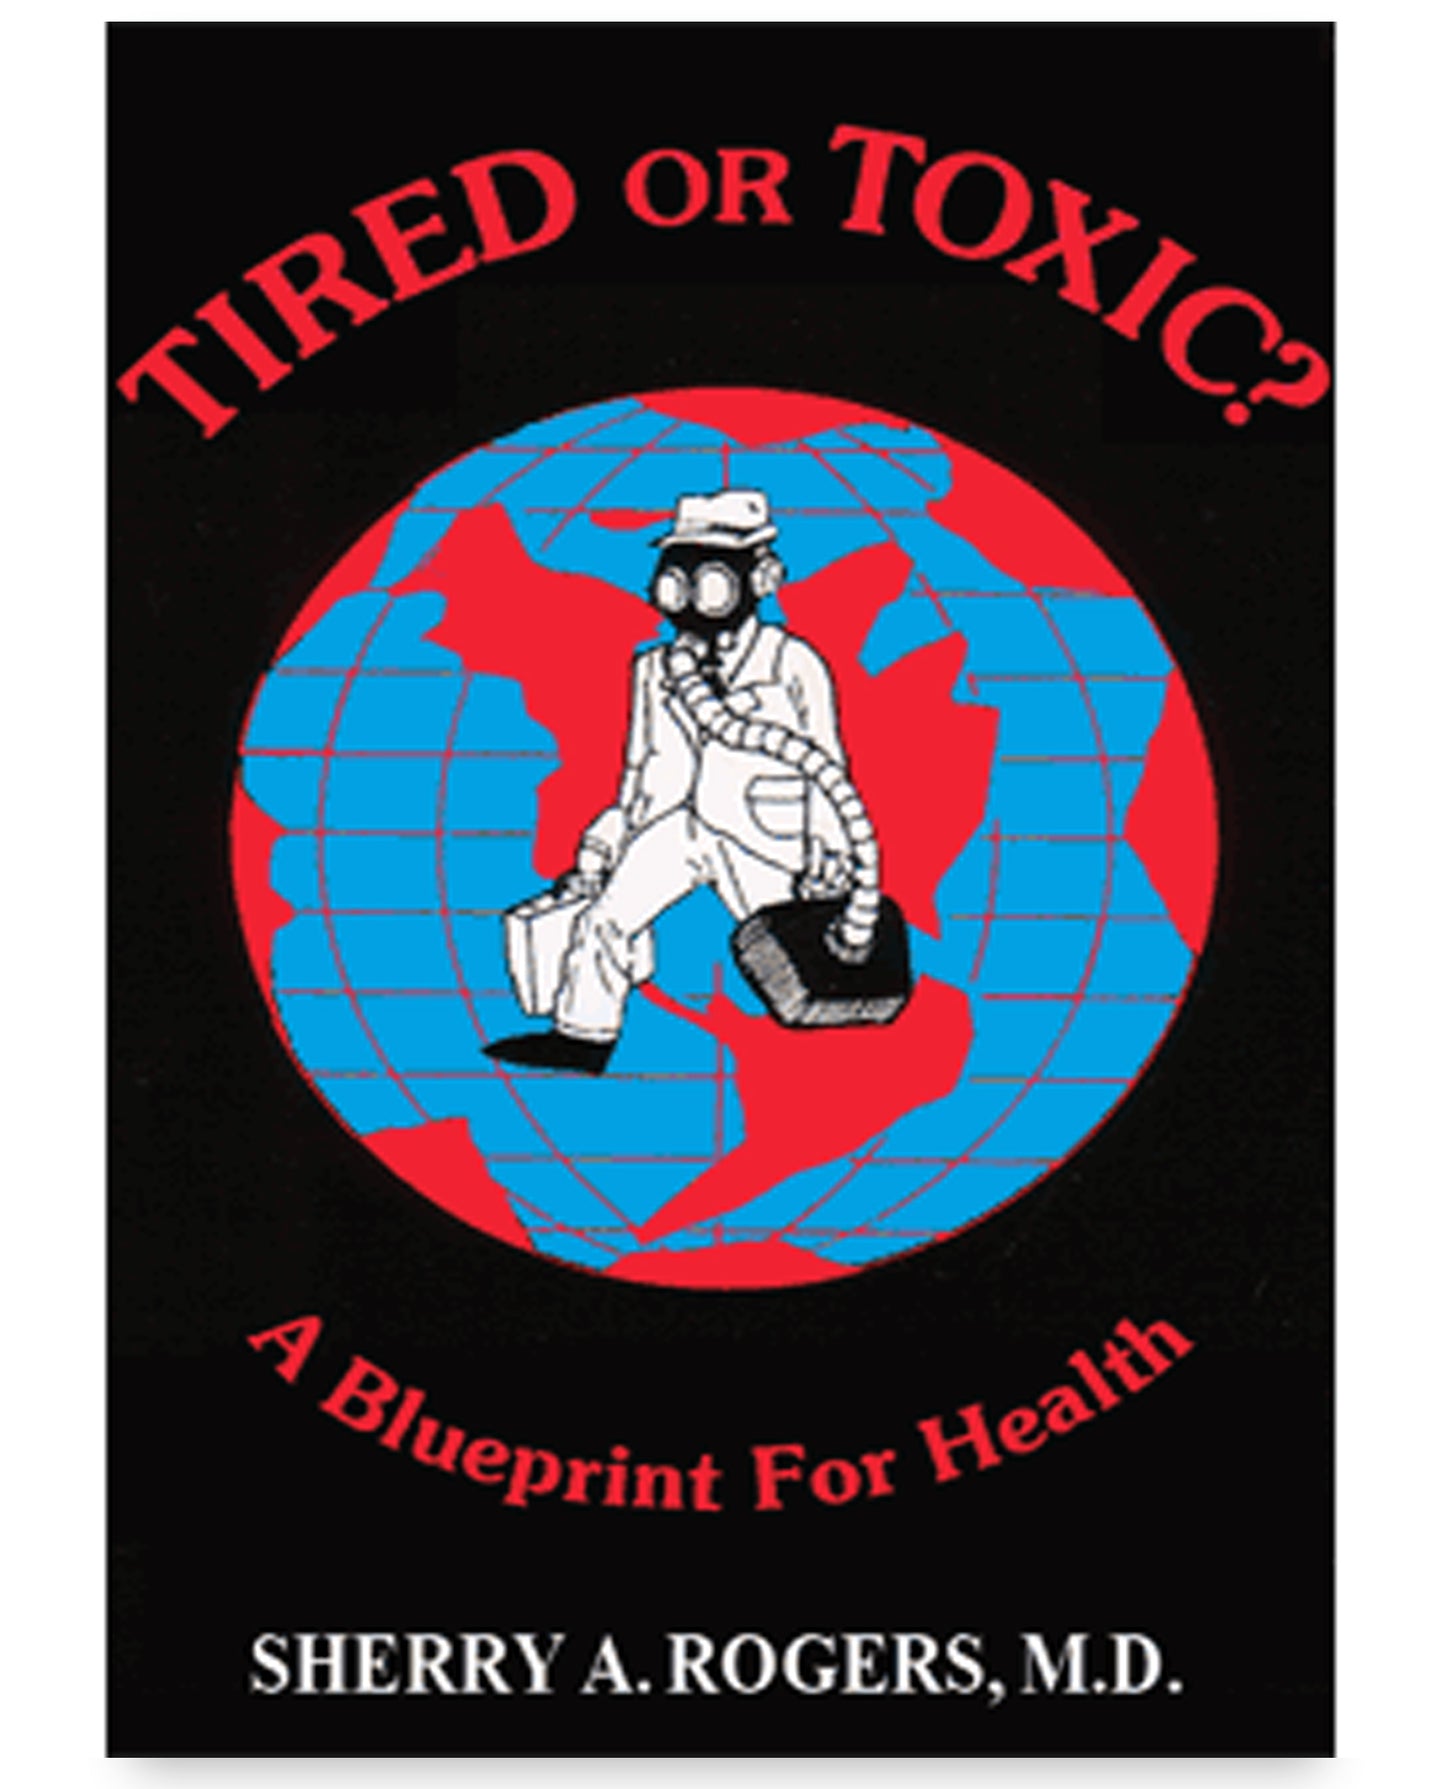 Tired or Toxic? A Blueprint for Health by Sherry A. Rogers, M.D.